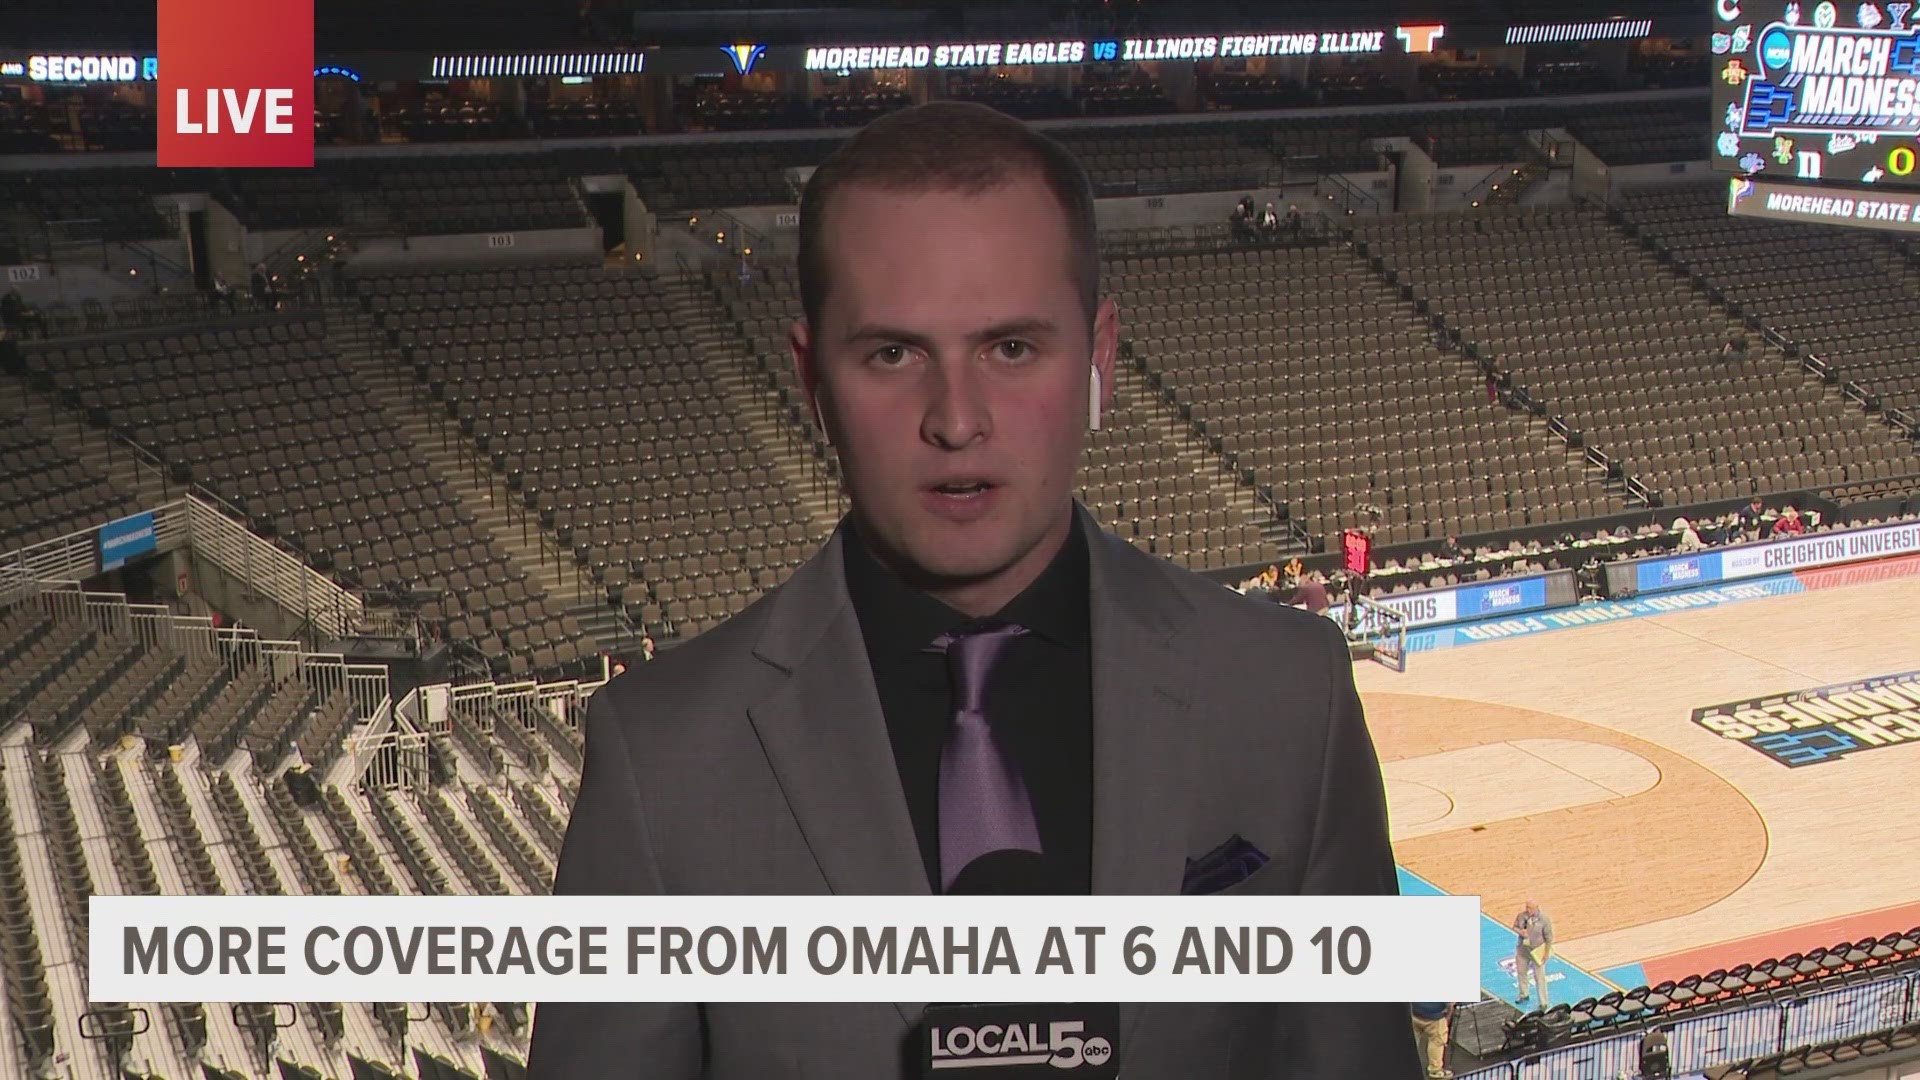 Local 5 will be live from Omaha all night long with all the latest NCAAM coverage.